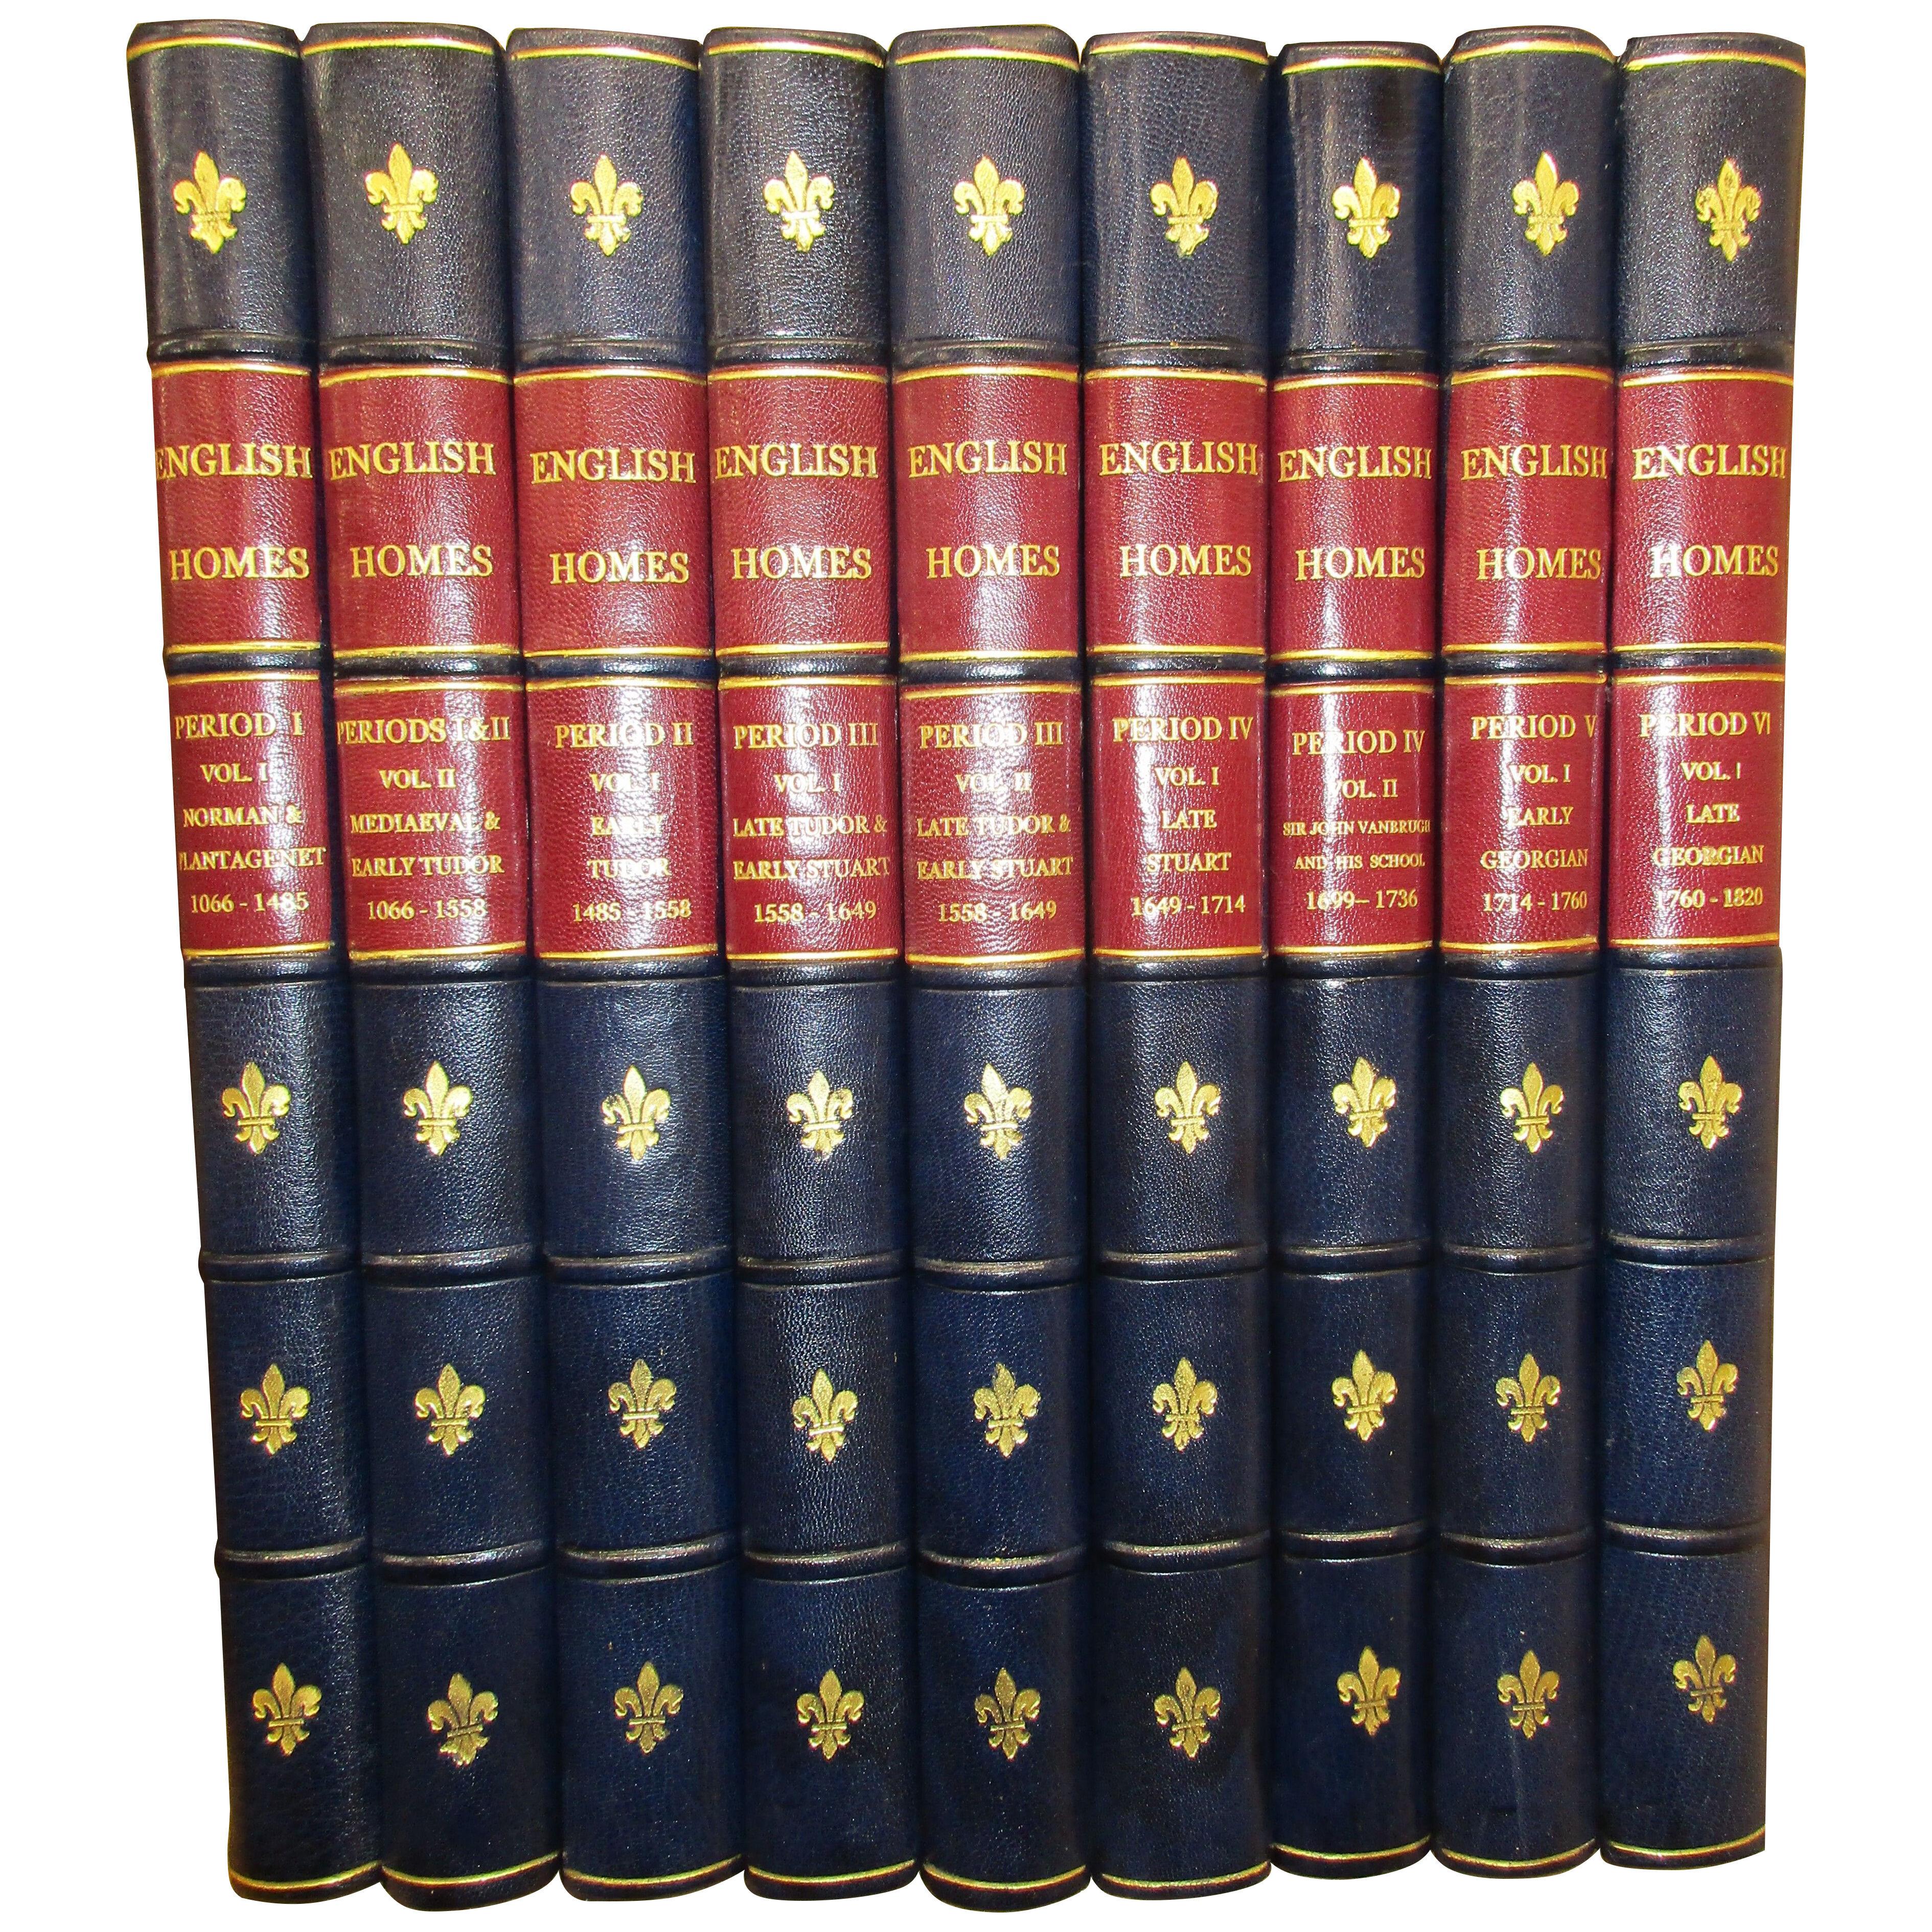 English Homes 1066-1820, Set of 9 Books by Avray Tipping